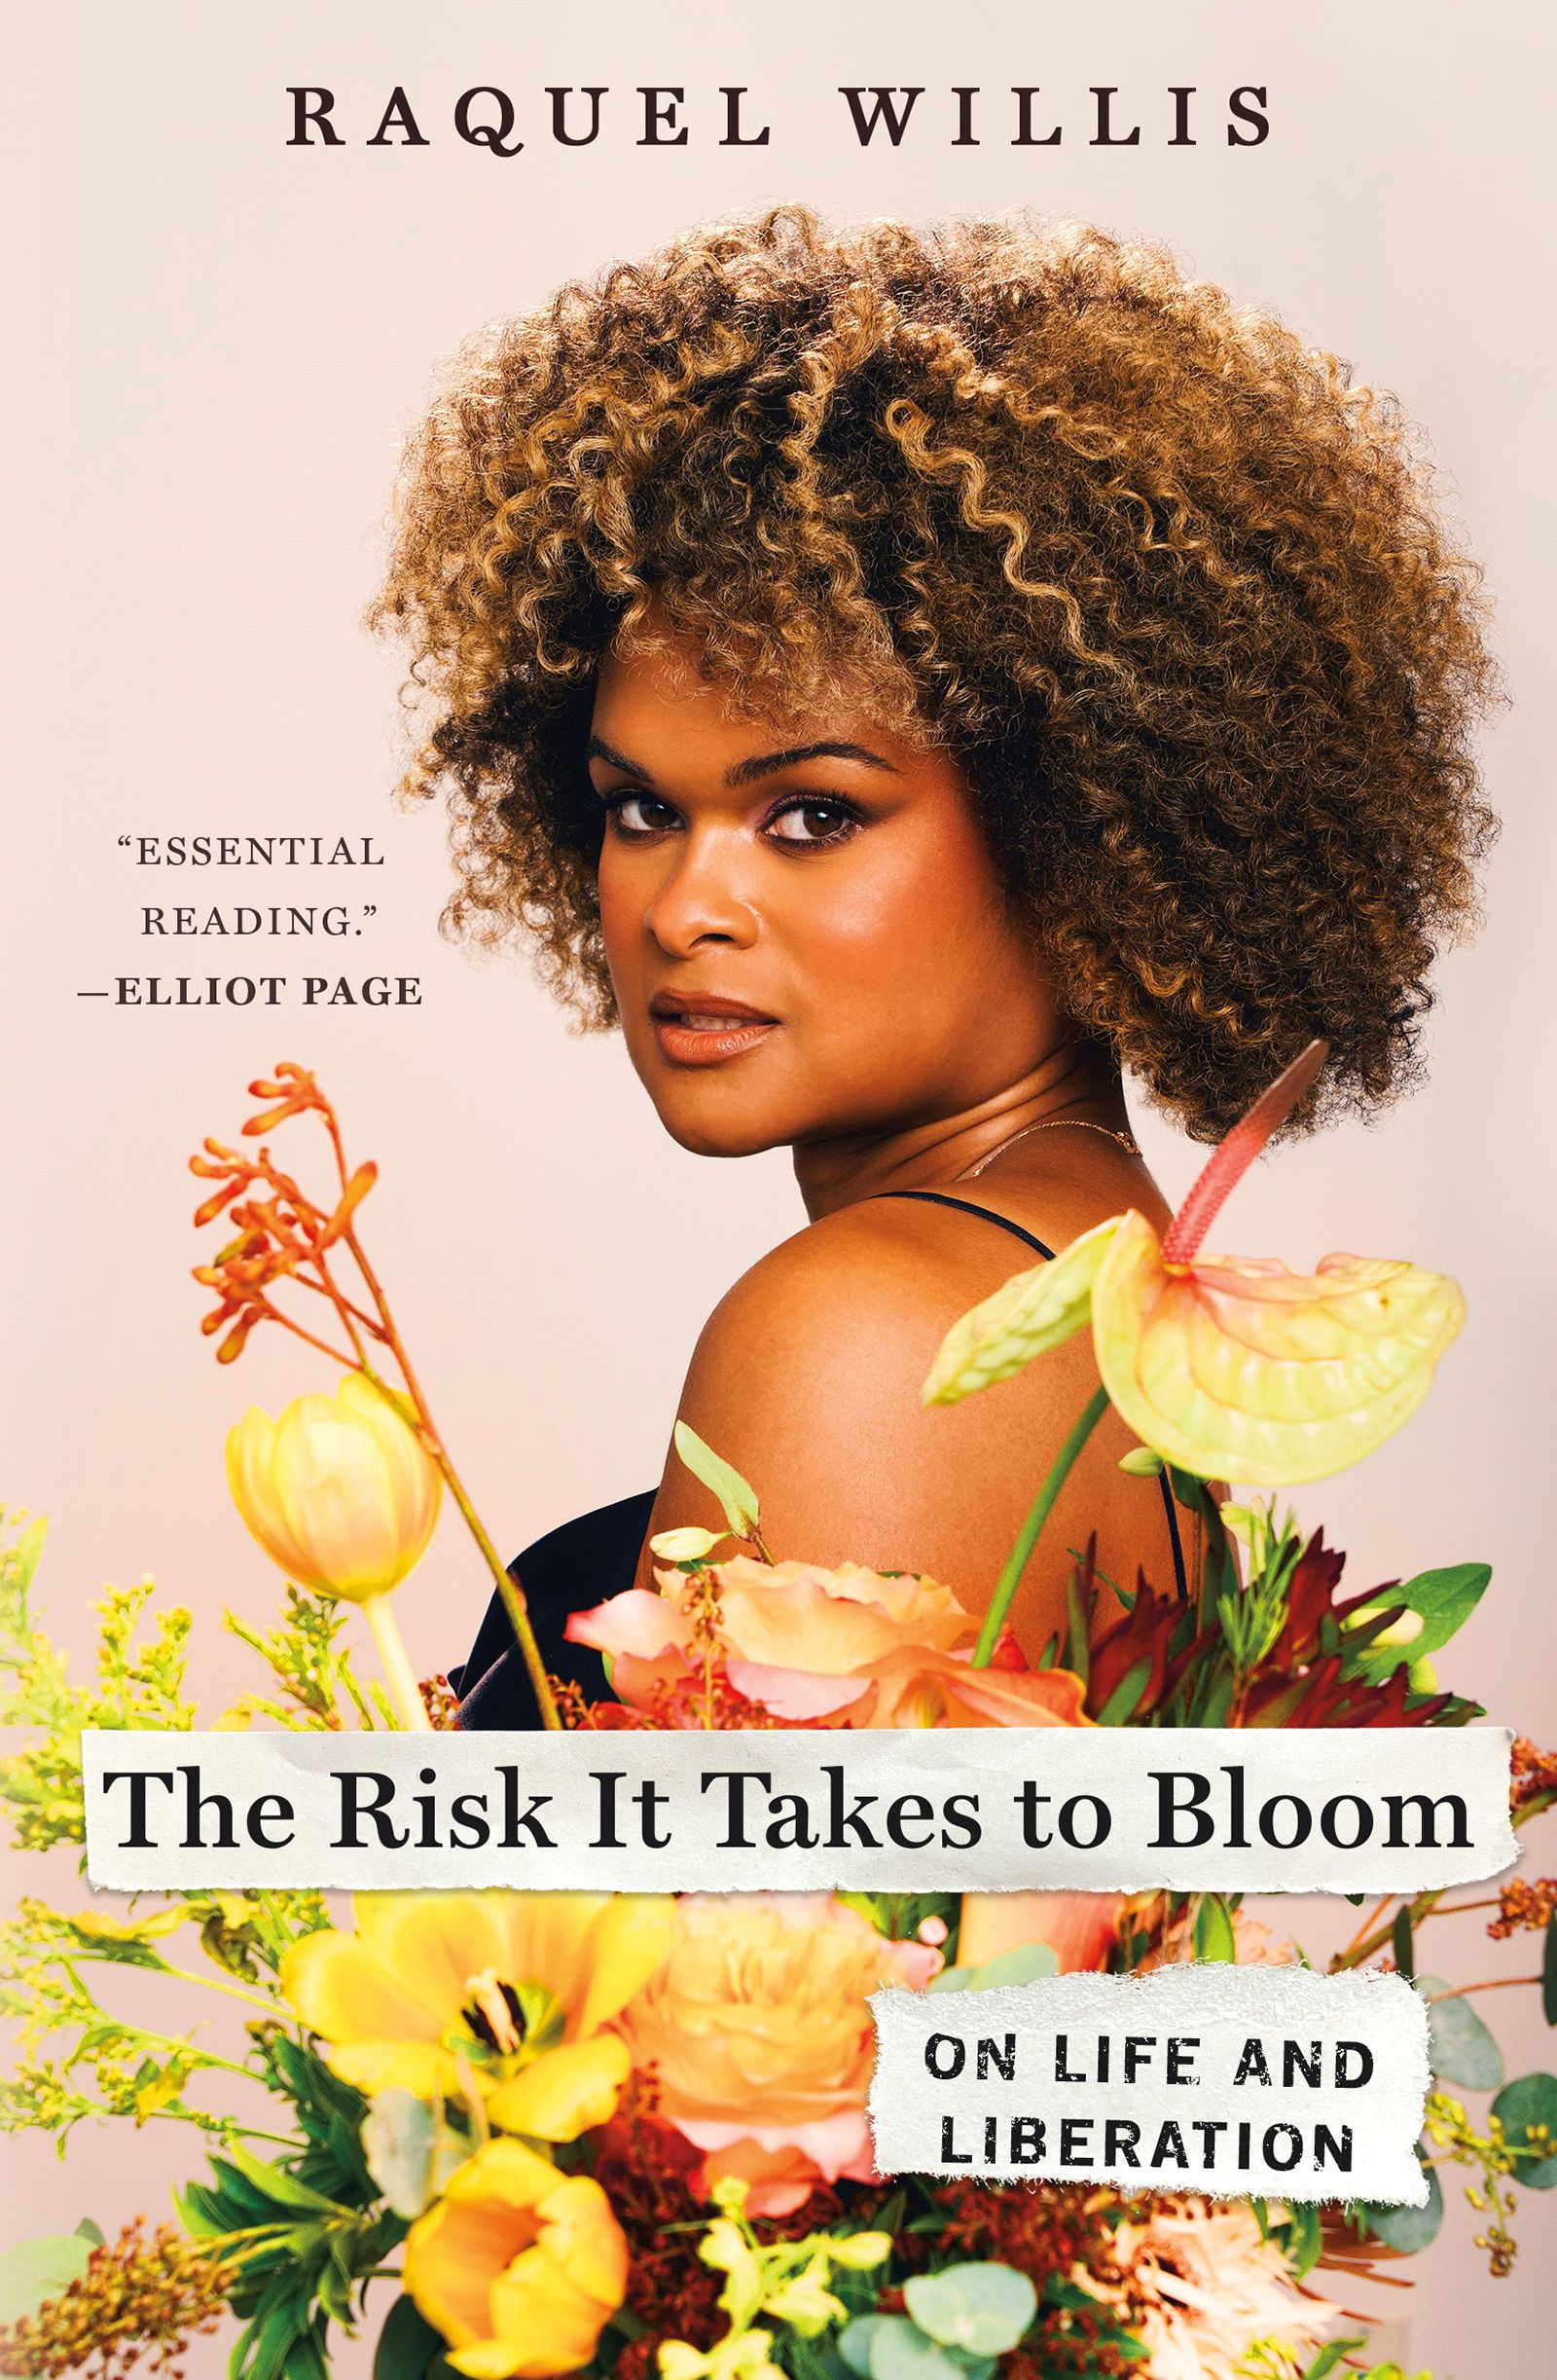 The title of the book comes from a line Willis first heard on an Alicia Keys album.